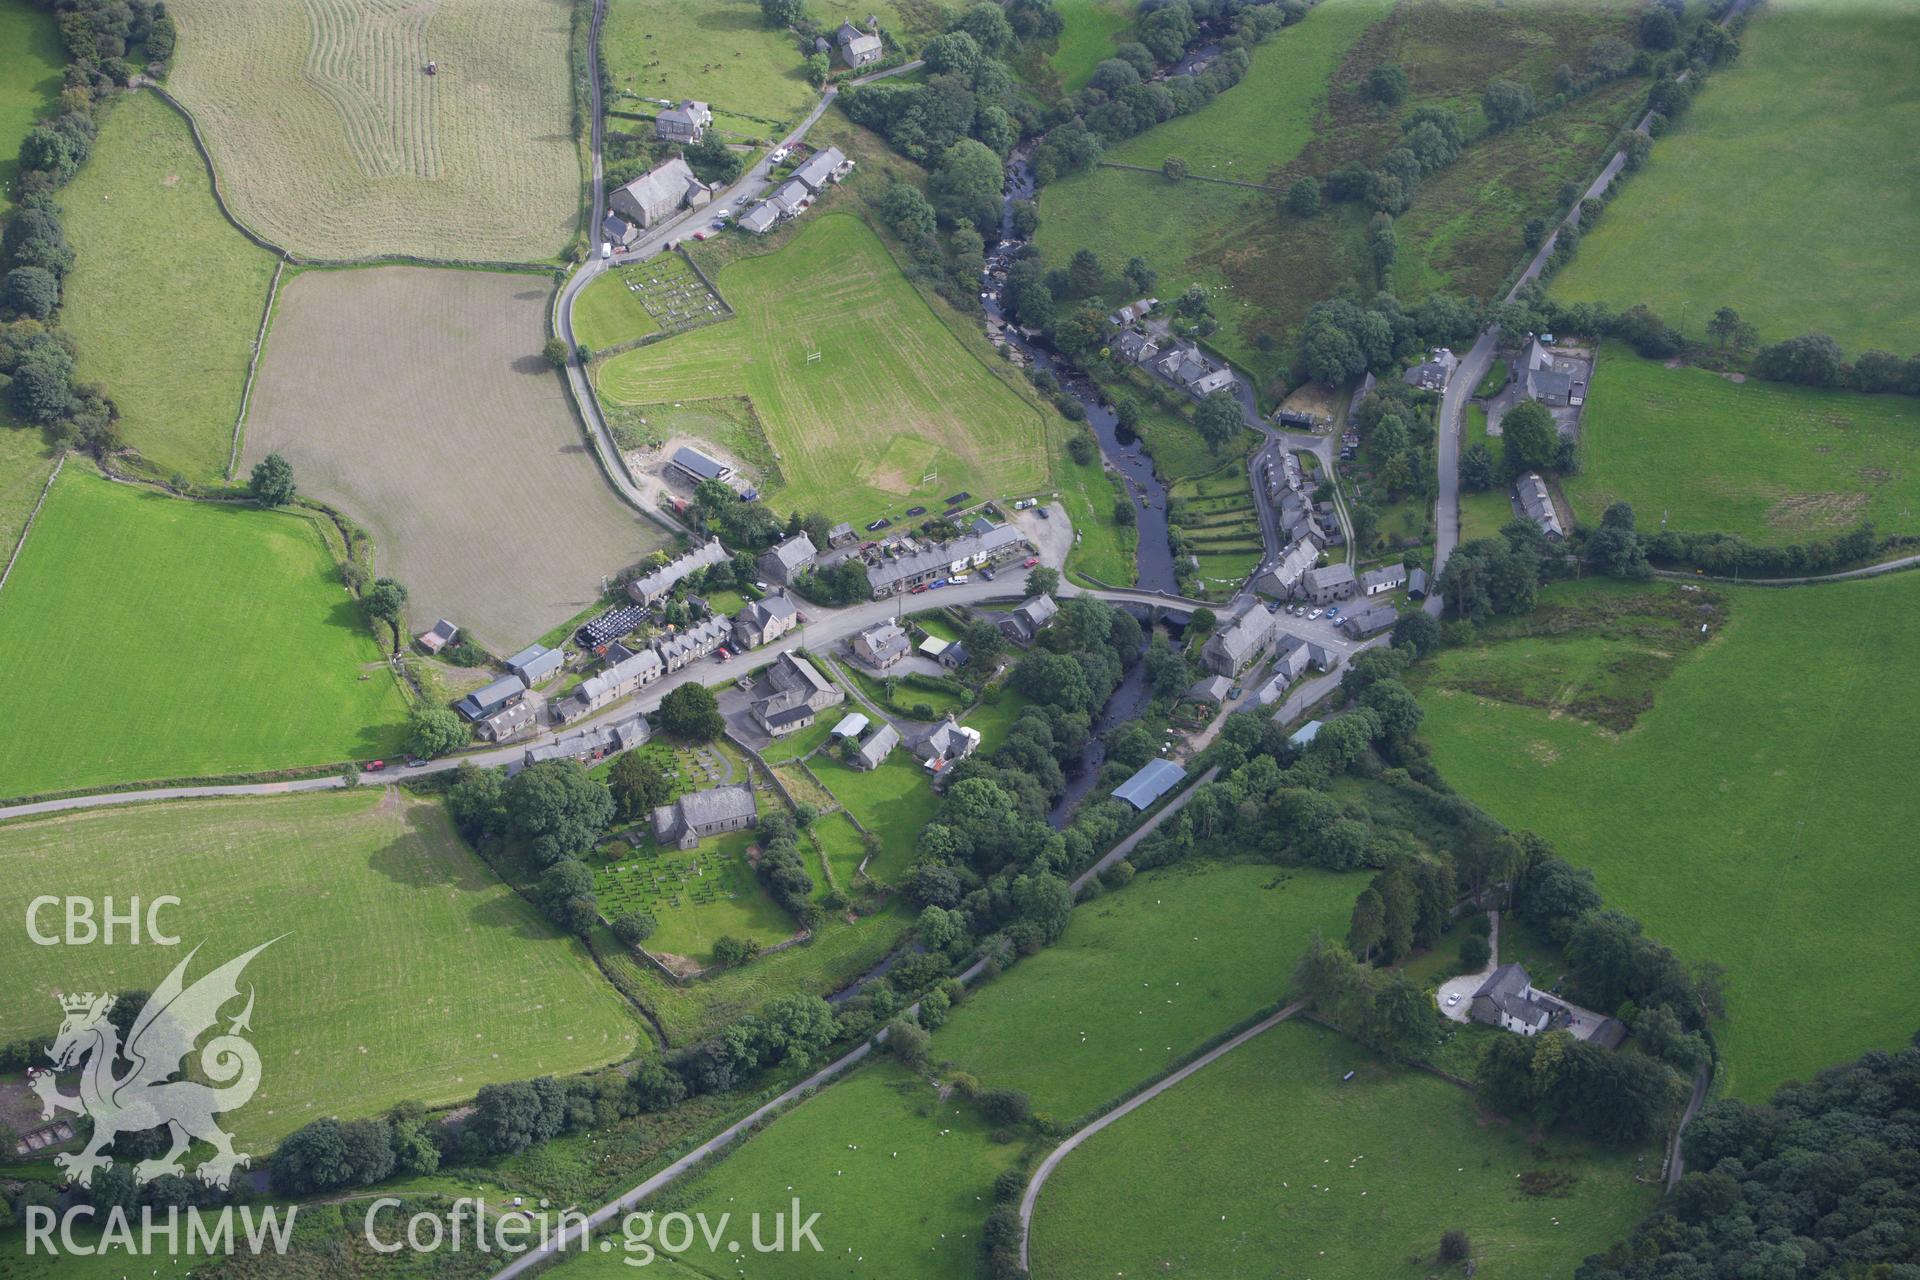 RCAHMW colour oblique aerial photograph of Yspytty Ifan. Taken on 06 August 2009 by Toby Driver